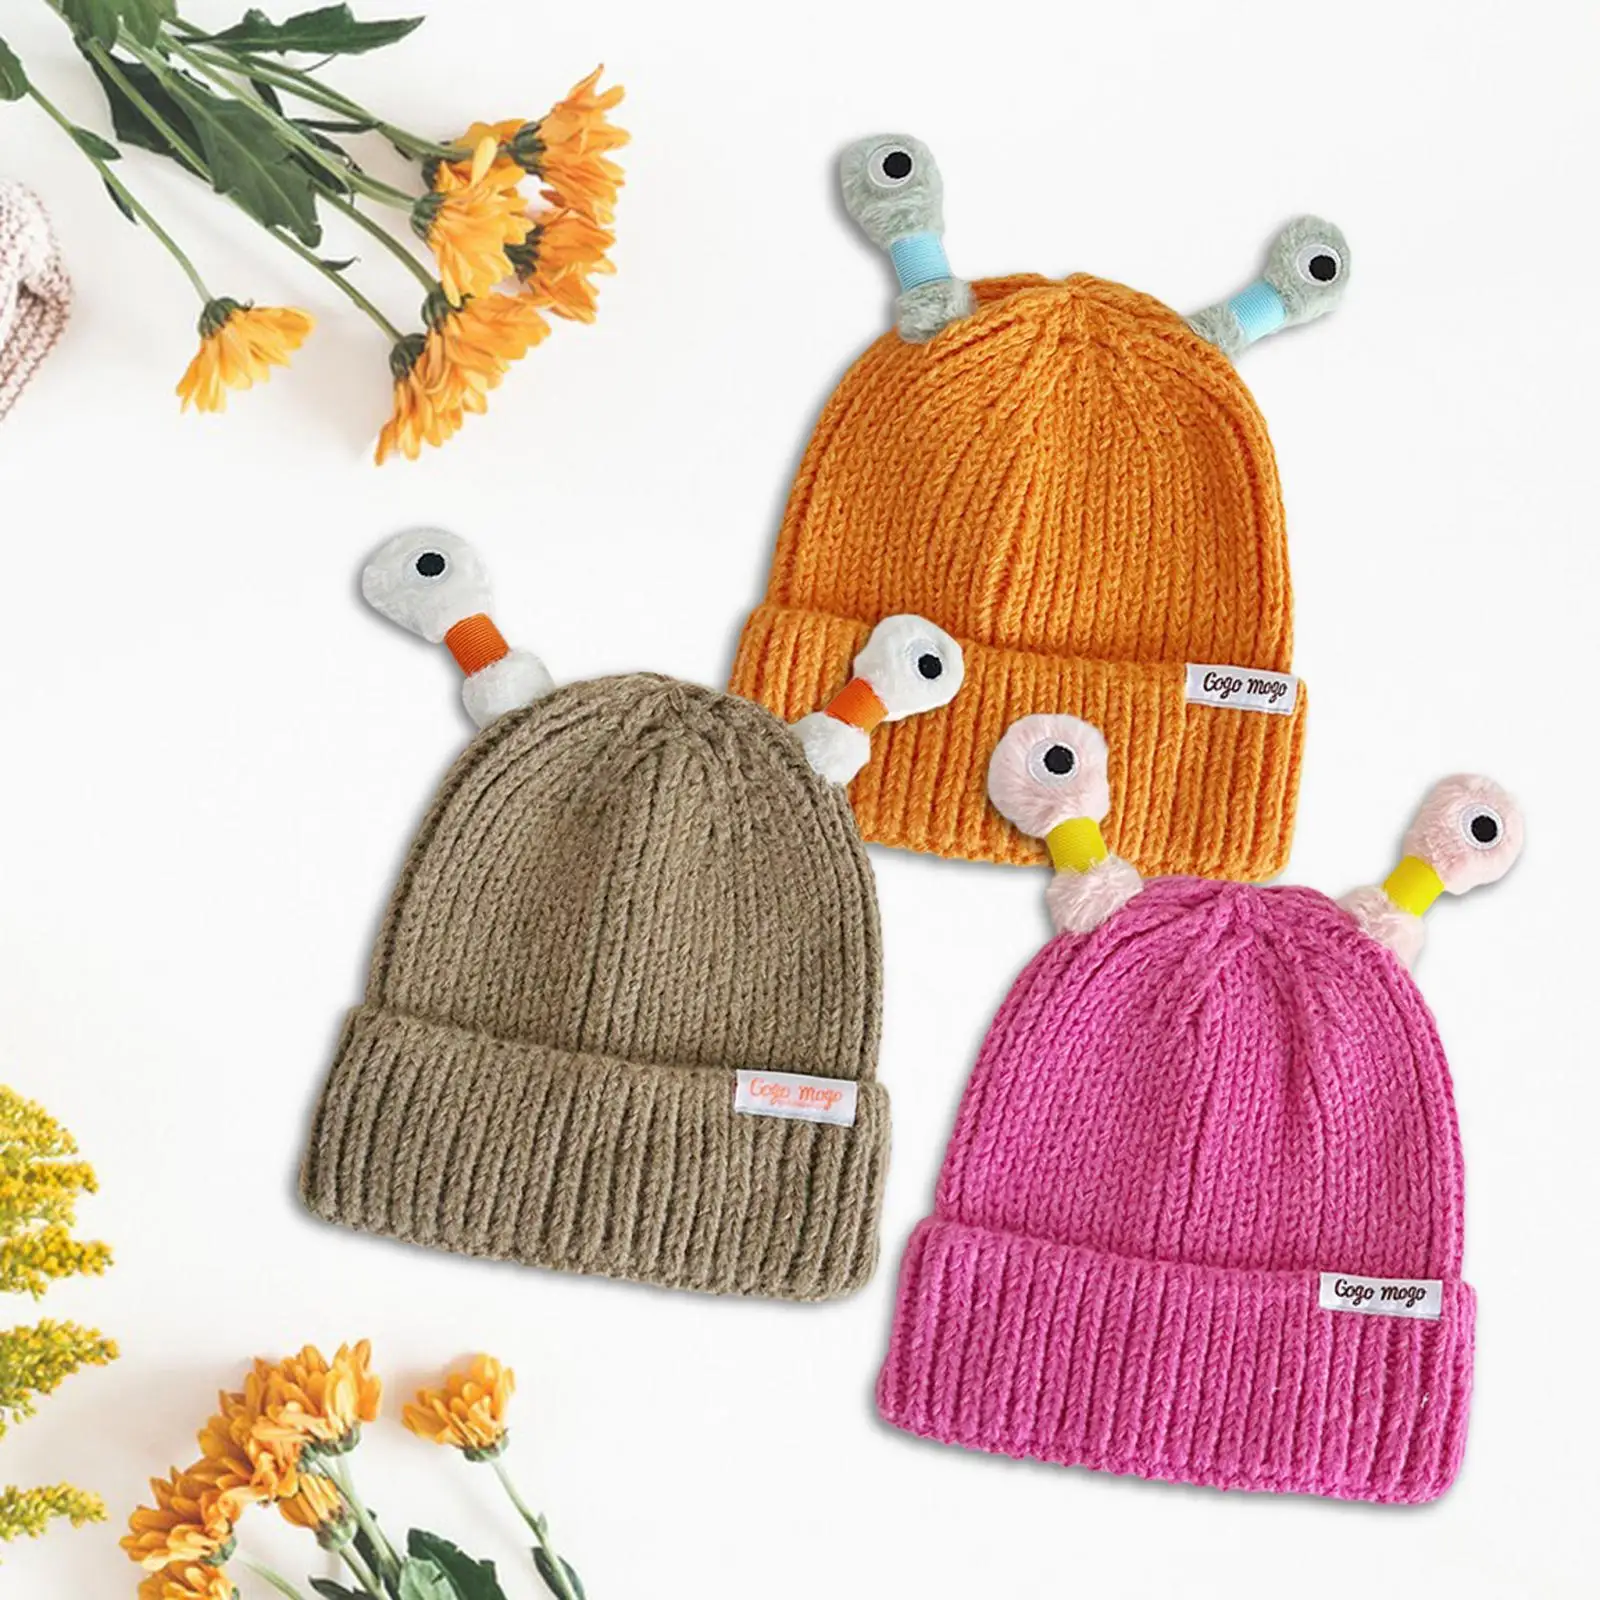 Funny Little Monster Knit Hat Lightweight Cute Adults Children Knitted Hat for Cosplay Hiking Stage Performance Skating Party